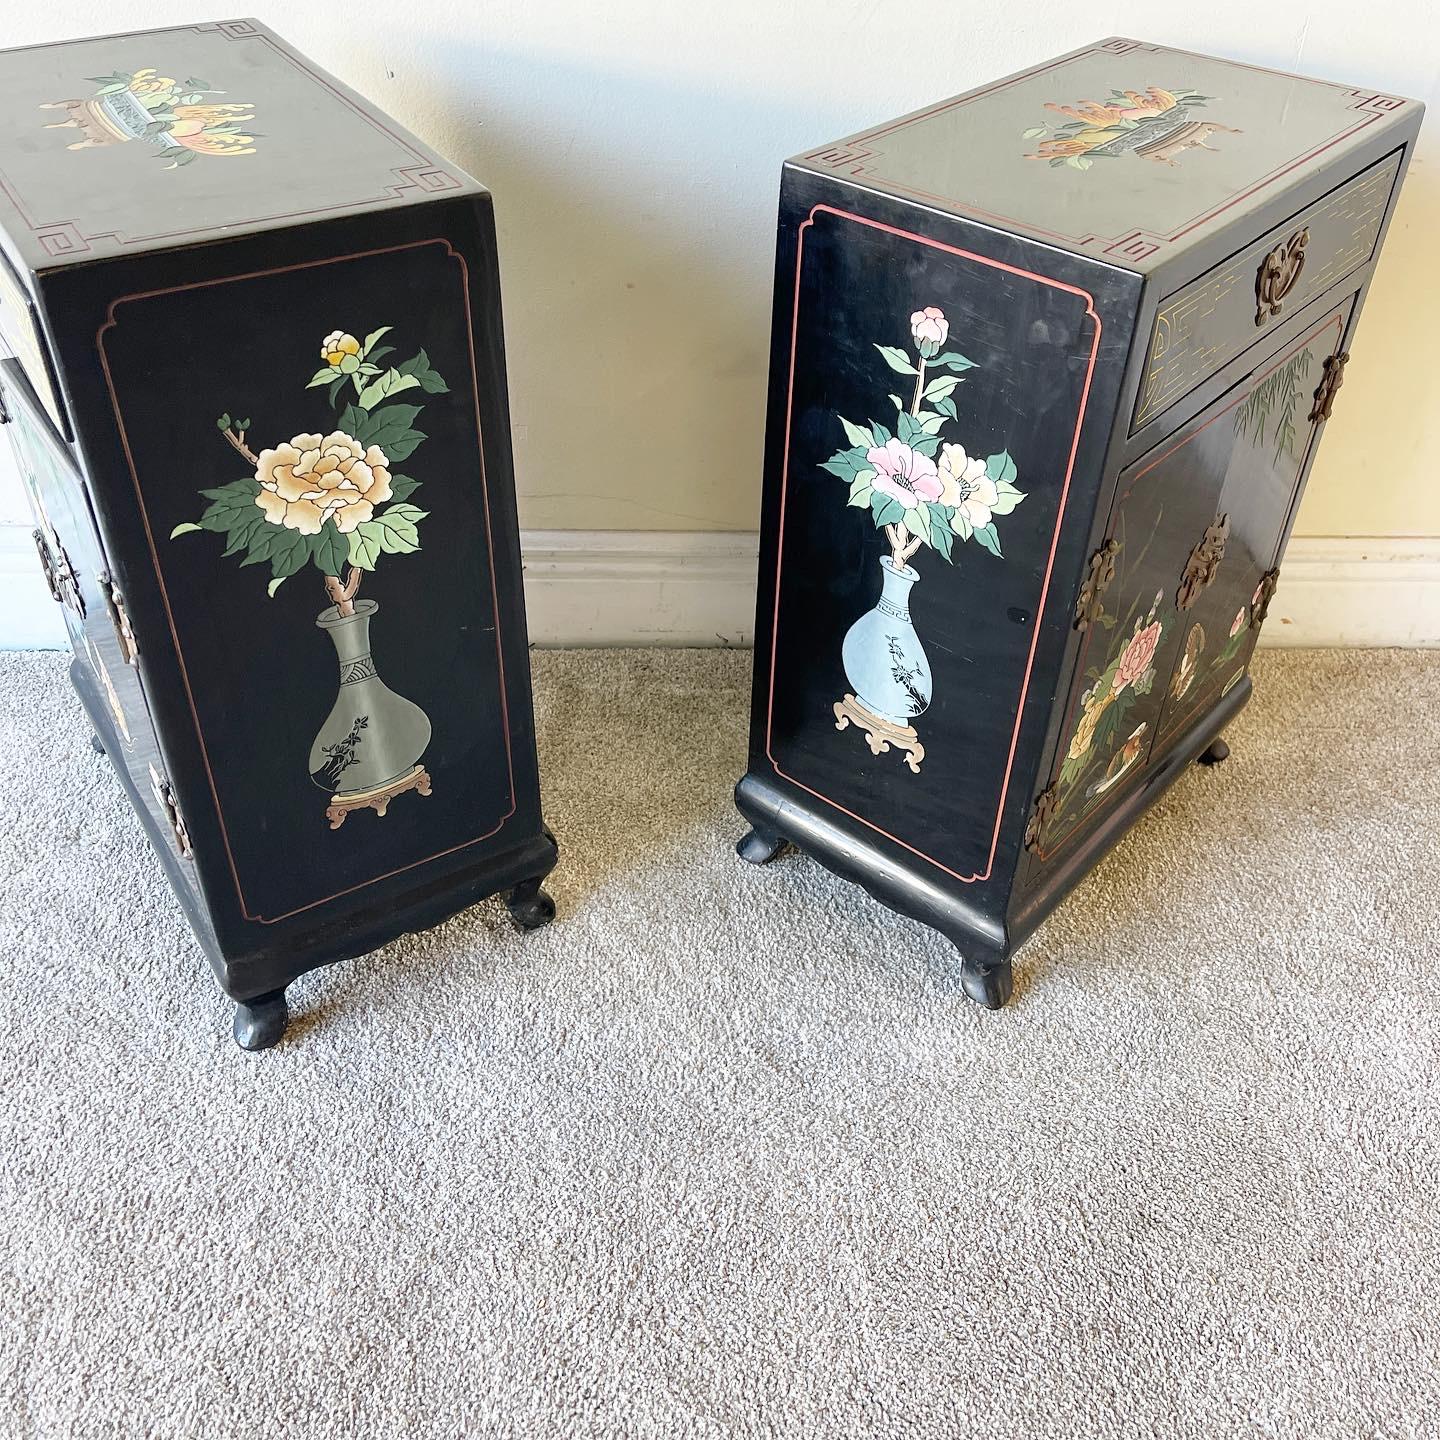 Incredible pair of Asian chinoiserie black lacquered shoe cabinets/side tables. Features hand painted and engraved floral and natural depictions.
 